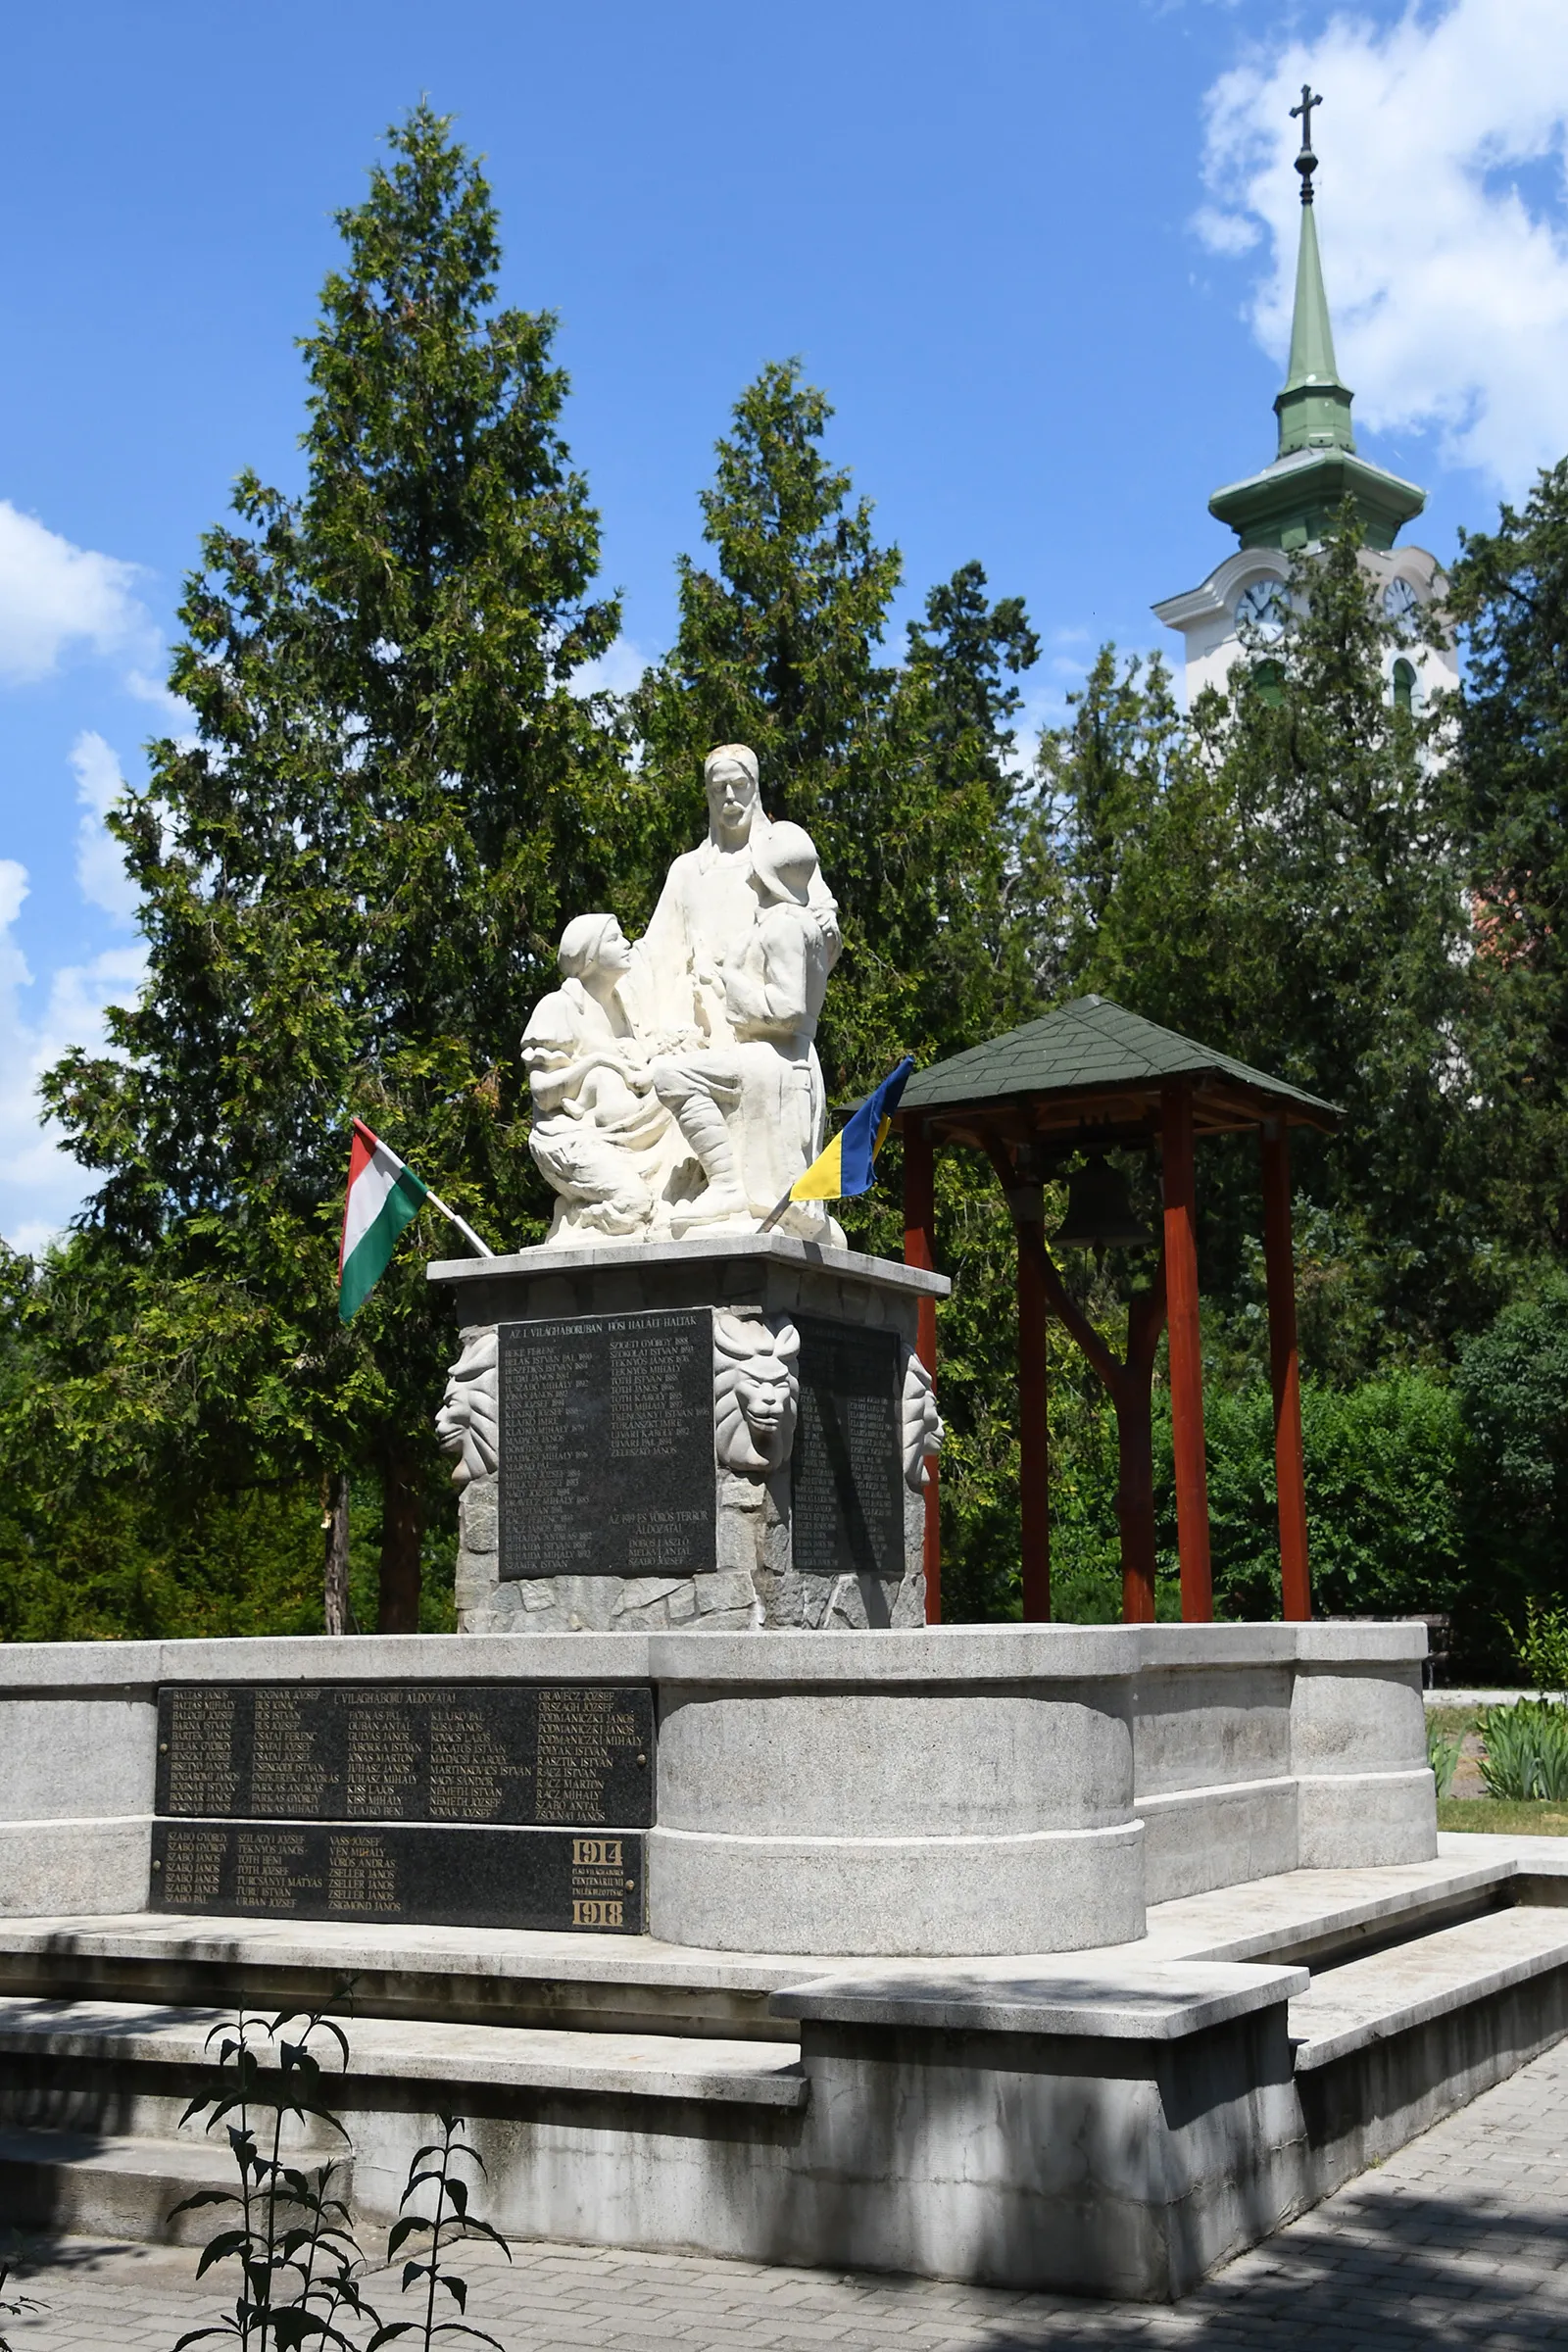 Photo showing: World Wars memorial in Akasztó, Hungary with the Roman Catholic church in the background